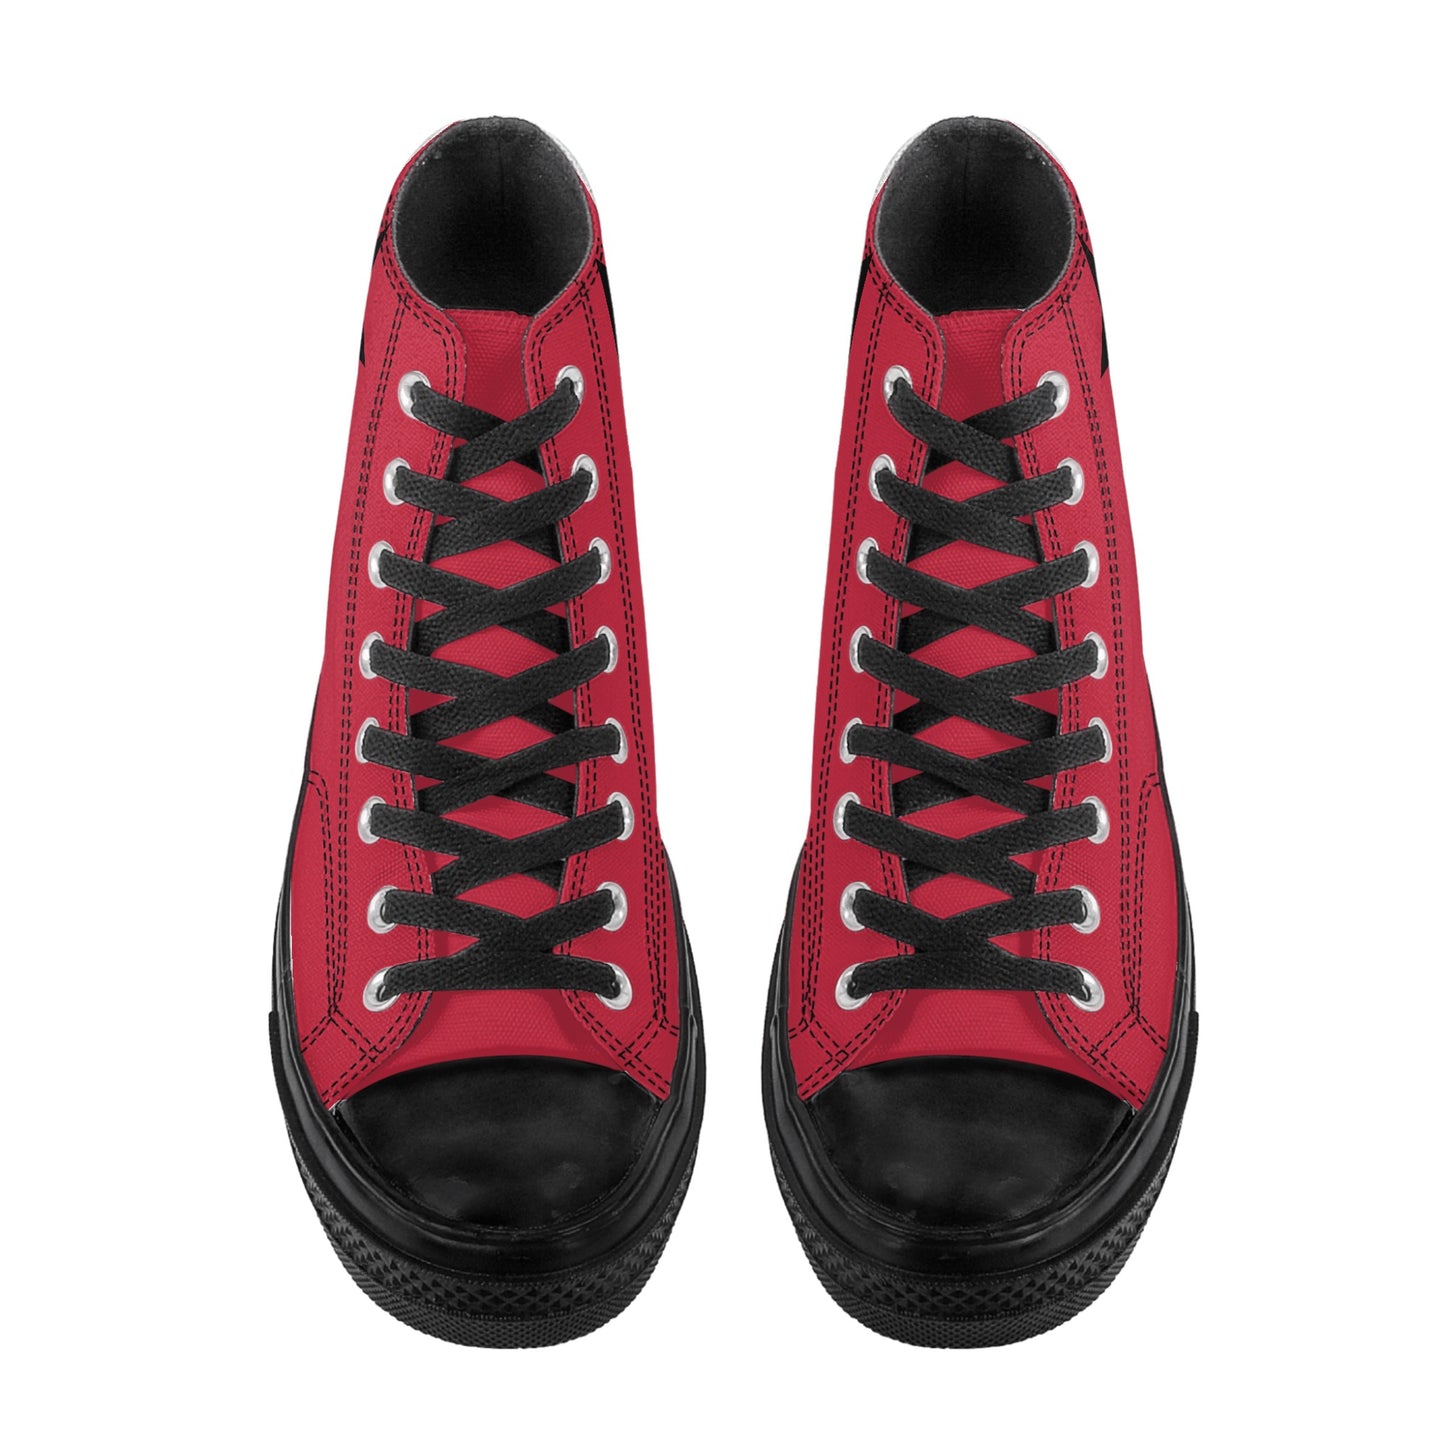 Red Harley Star Diamond Mens Classic Black High Tops Sneakers Canvas Shoes